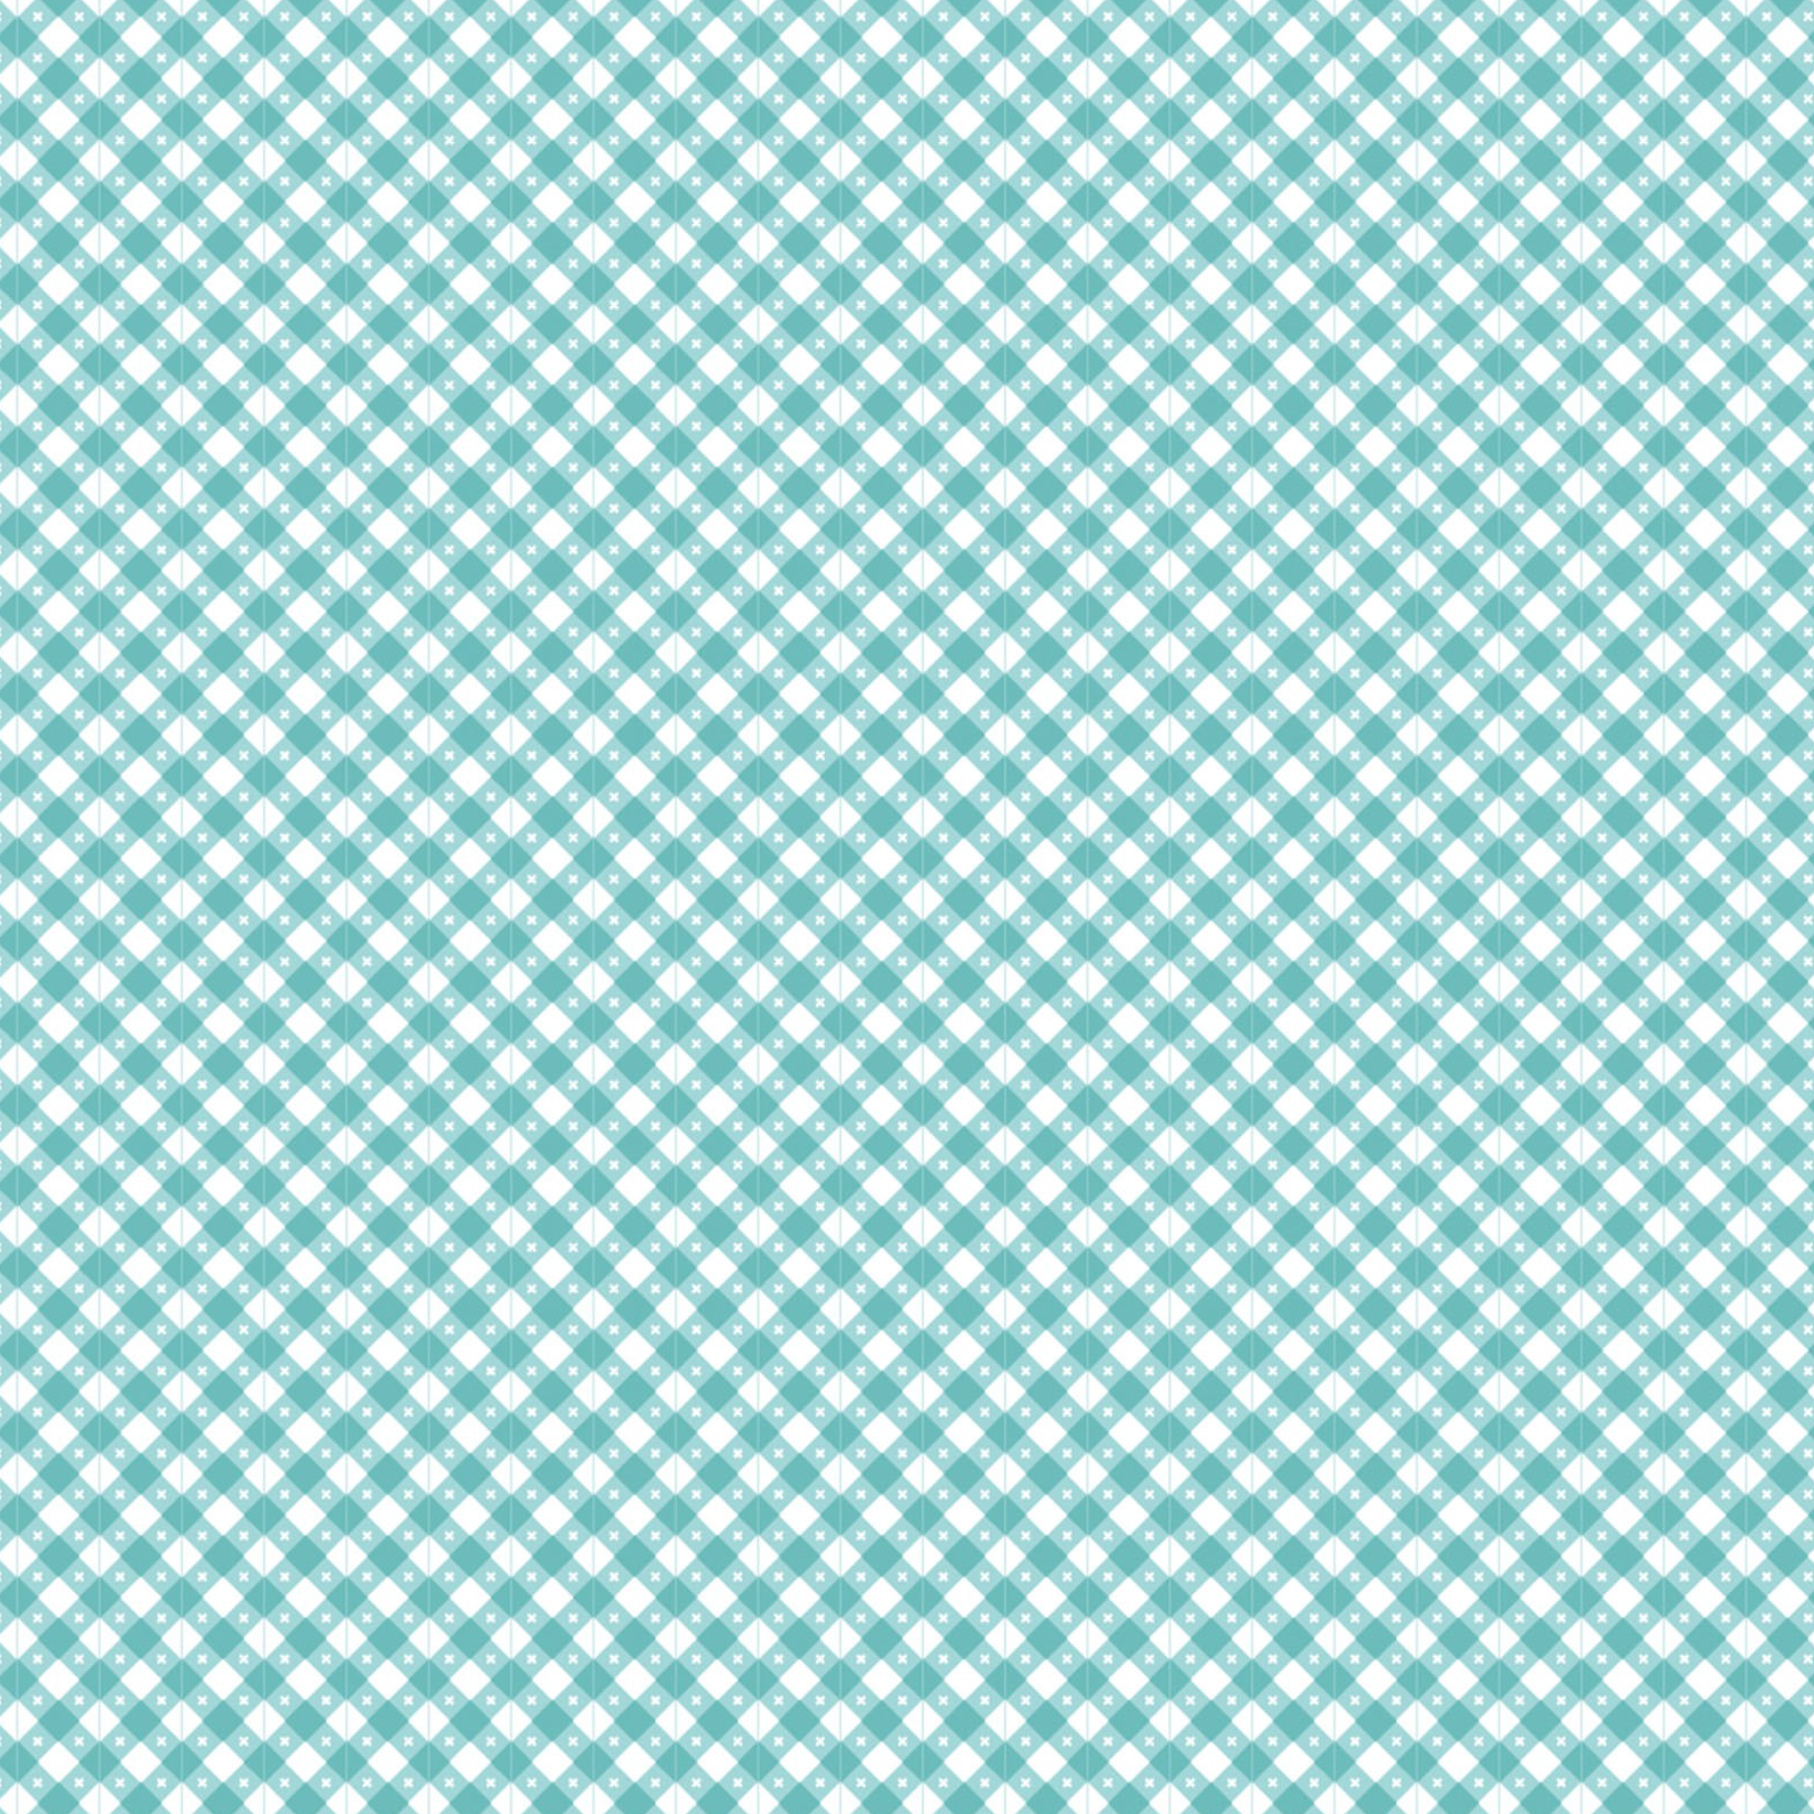 Gingham Picnic Aqua Seaside GP21216, sold by the 1/2 yard - Good Vibes Quilt Shop